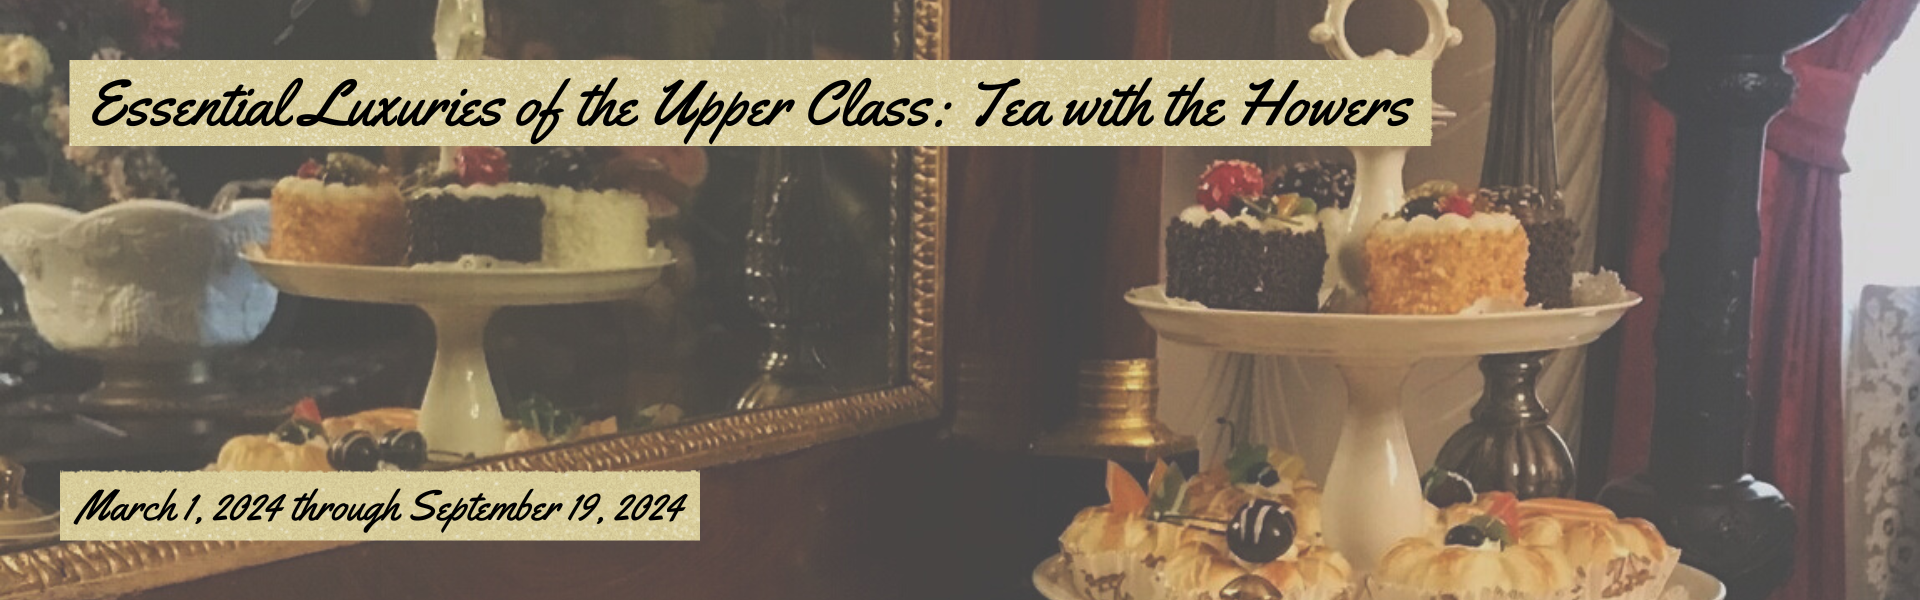 Website Banner Tea with the Howers Spring 2024